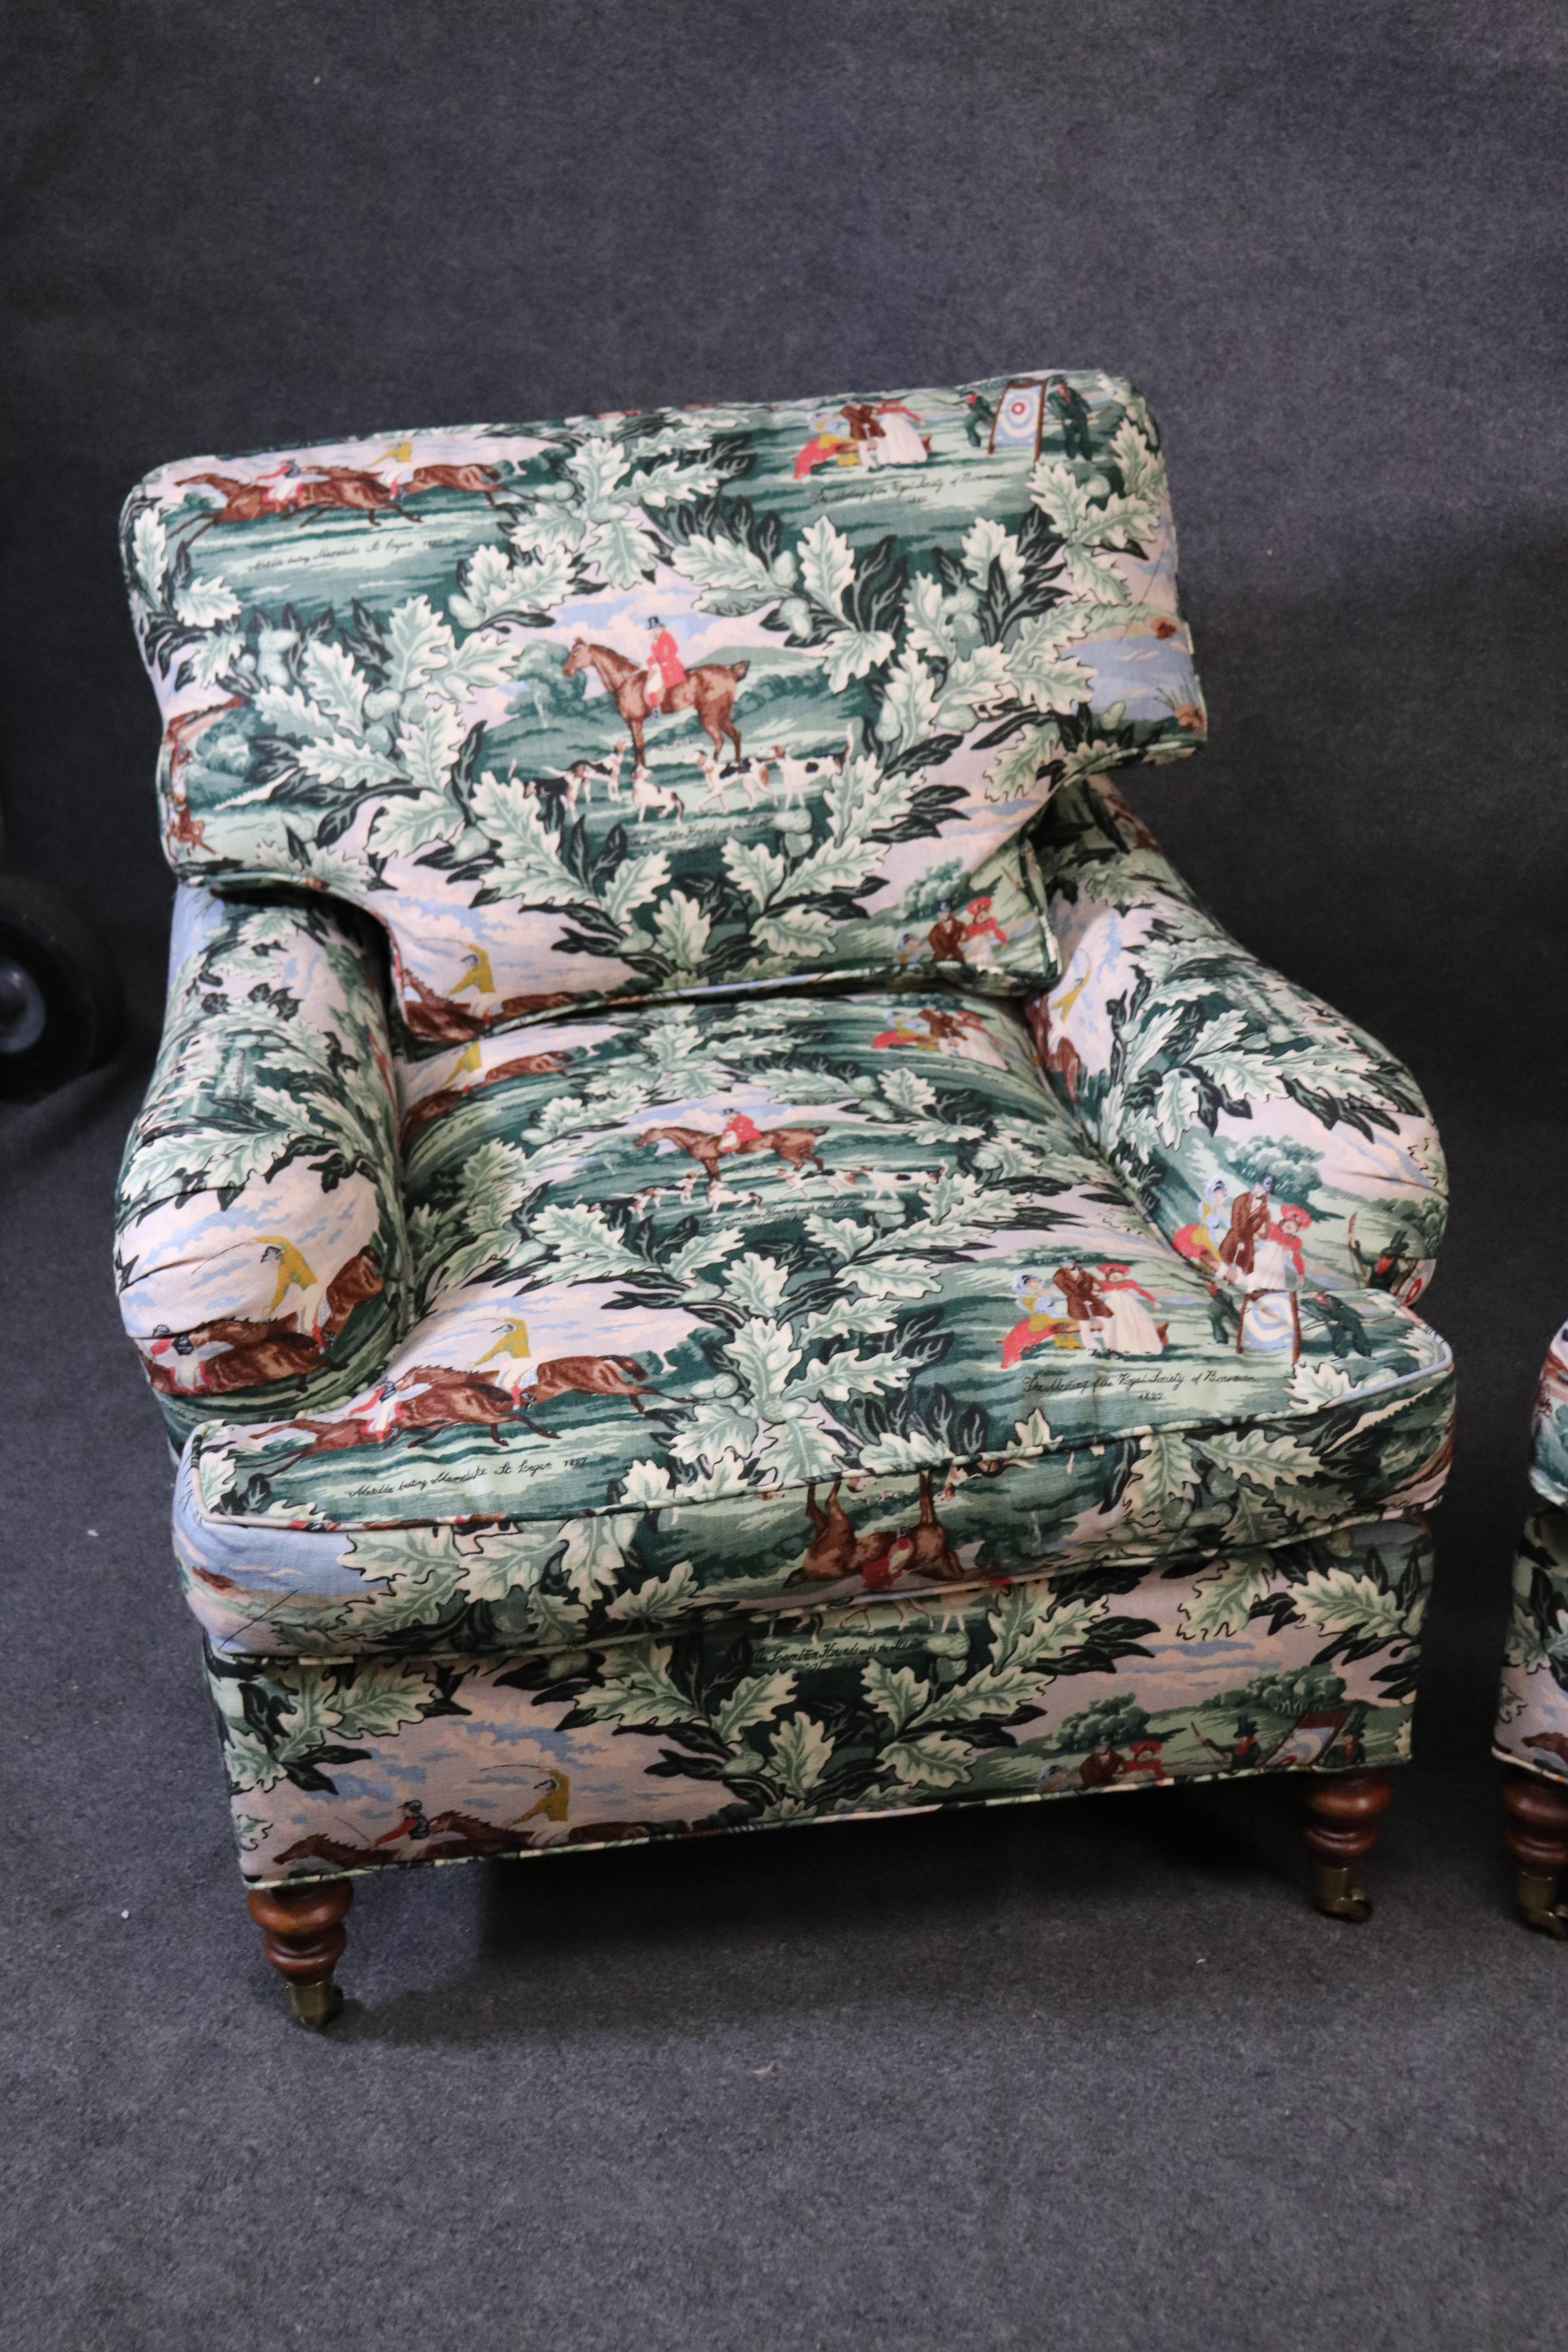 North American Pair of Edward Ferrell Polo Players Edwardian Upholstered Club Chairs